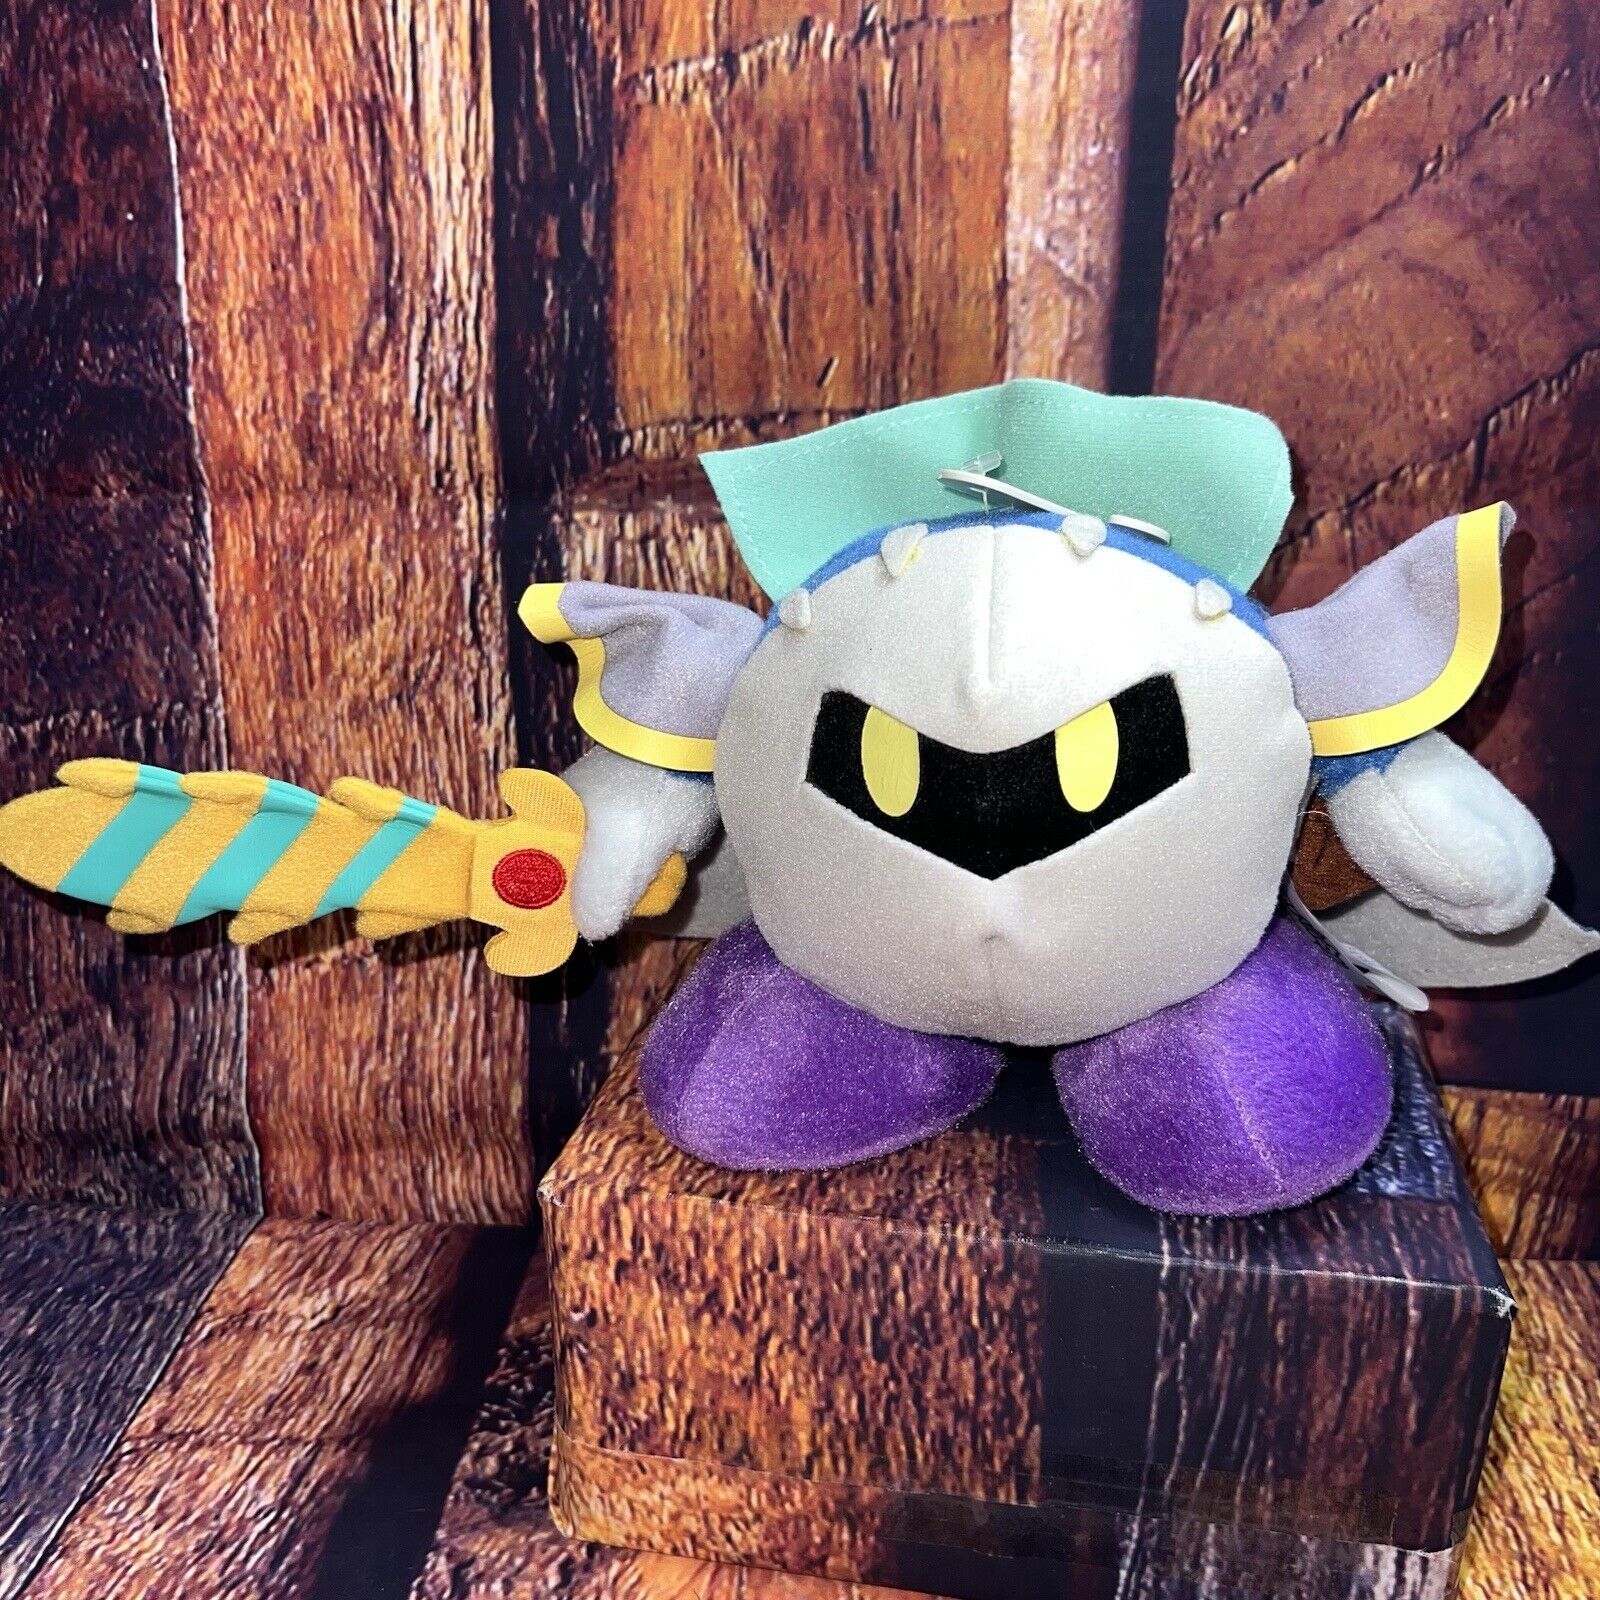 VTG Nintendo Kirby Game Meta Knight With Sword Plush Stuffed Toy Collector